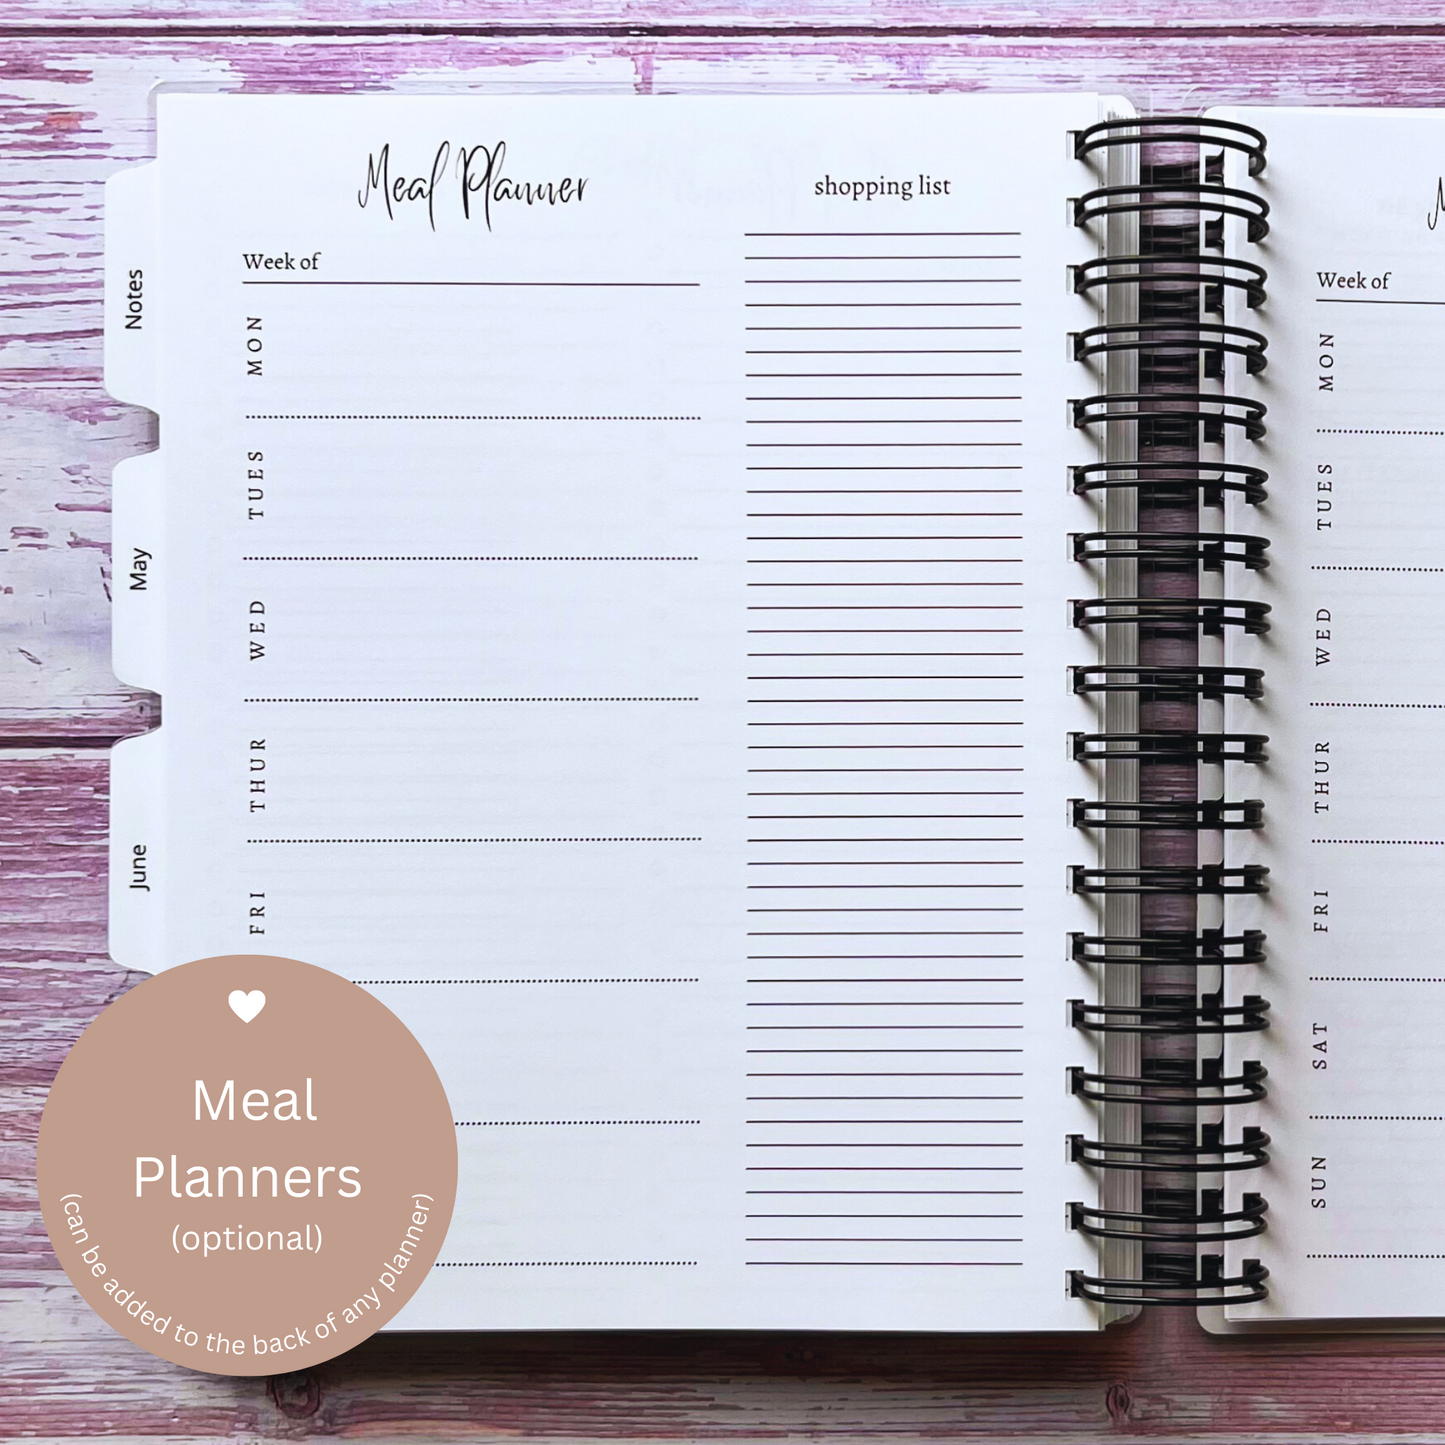 Personalized 6 Month Daily Planner | Dragon Castle